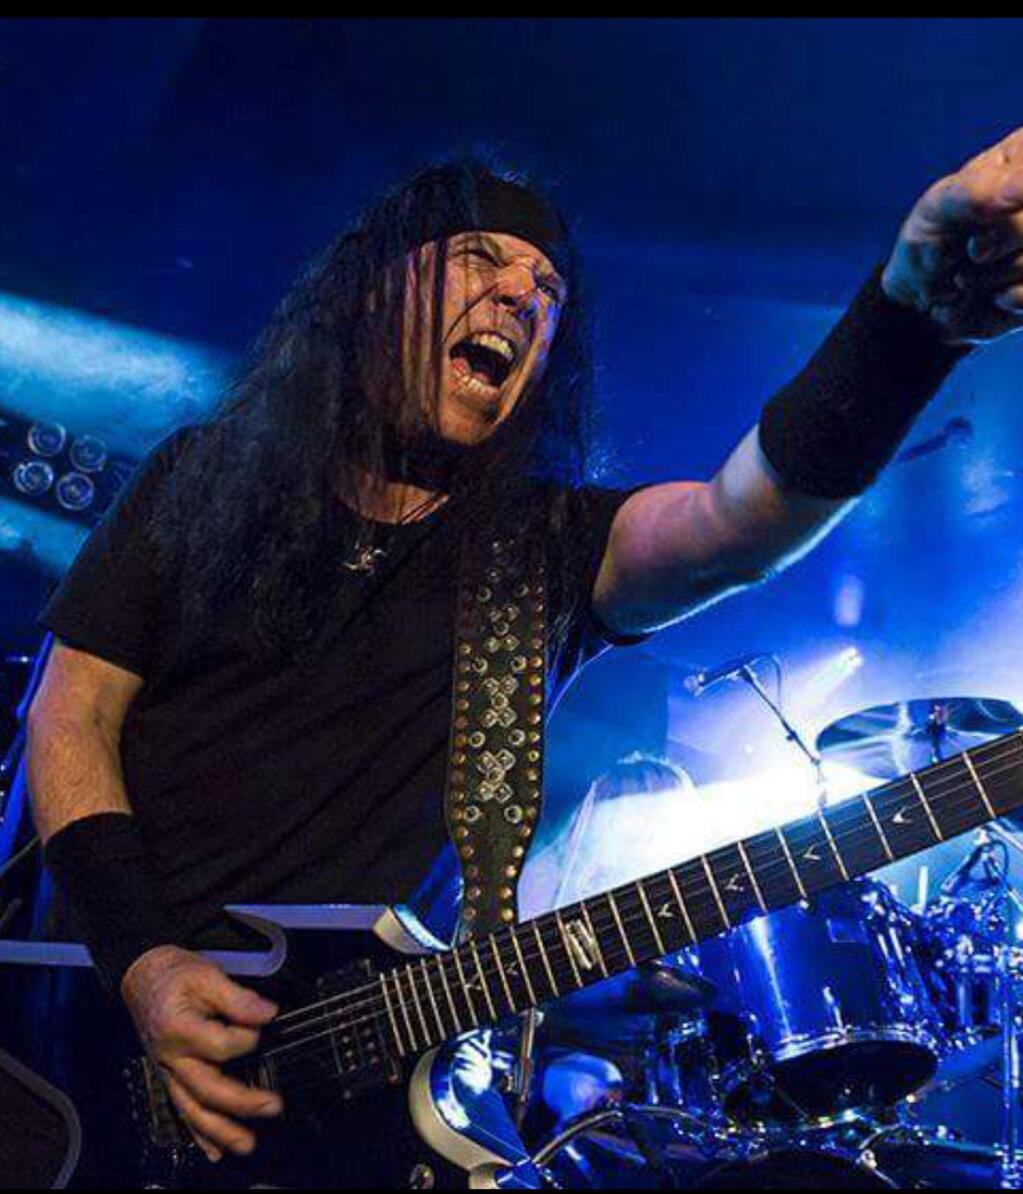 Geoff Thorpe, who moved to Santa Rosa in 1979 and founded Vicious Rumors, an American heavy metal band that has a big following around the world, especially in Europe. (FREEMAN PROMOTIONS)